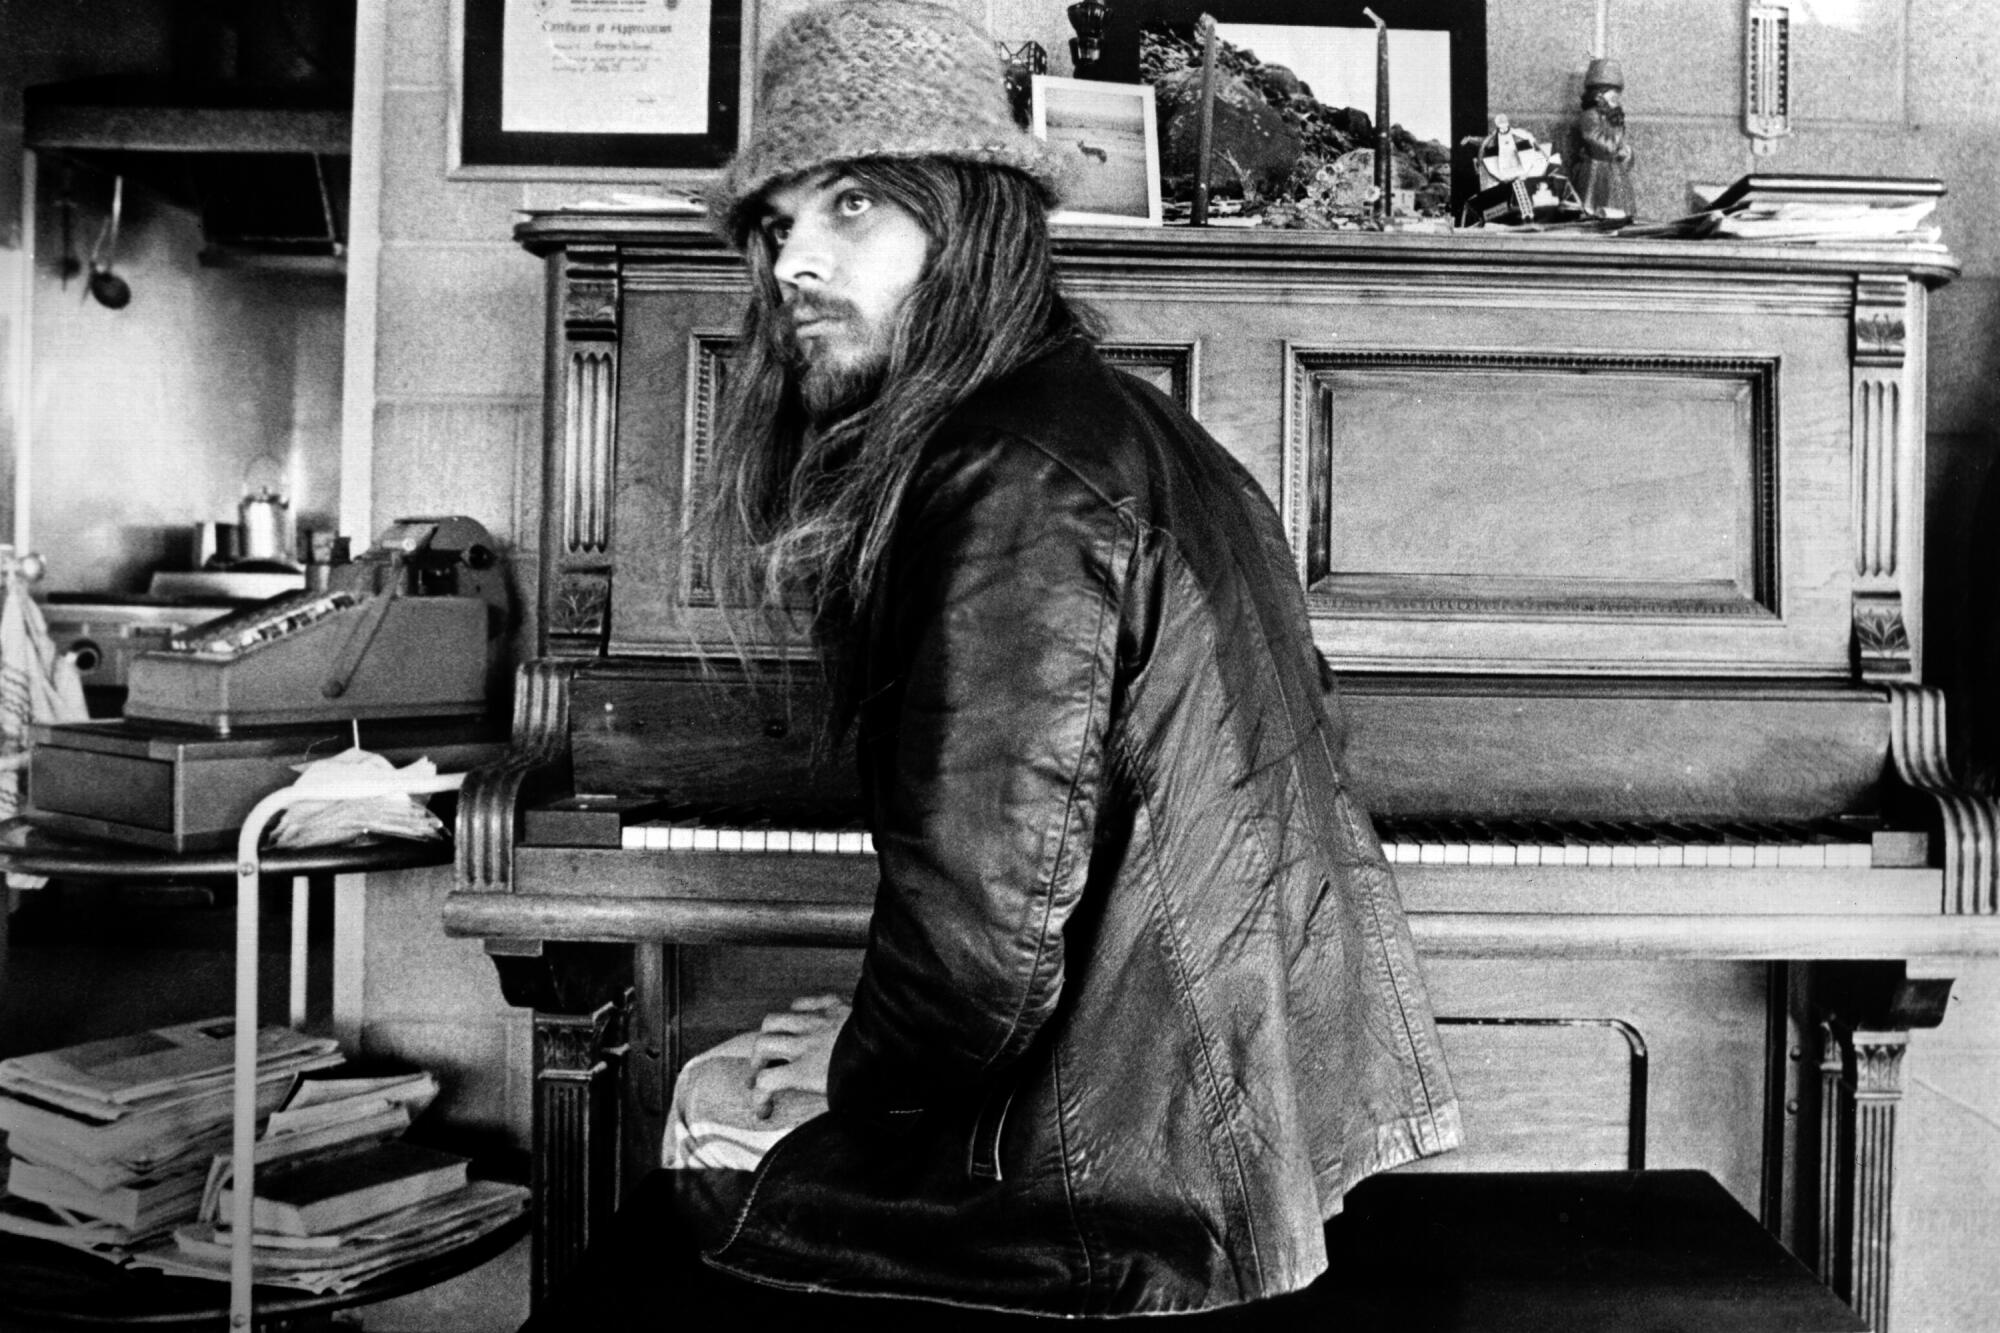 A singer-songwriter with long hair and a hat sits in front of a piano